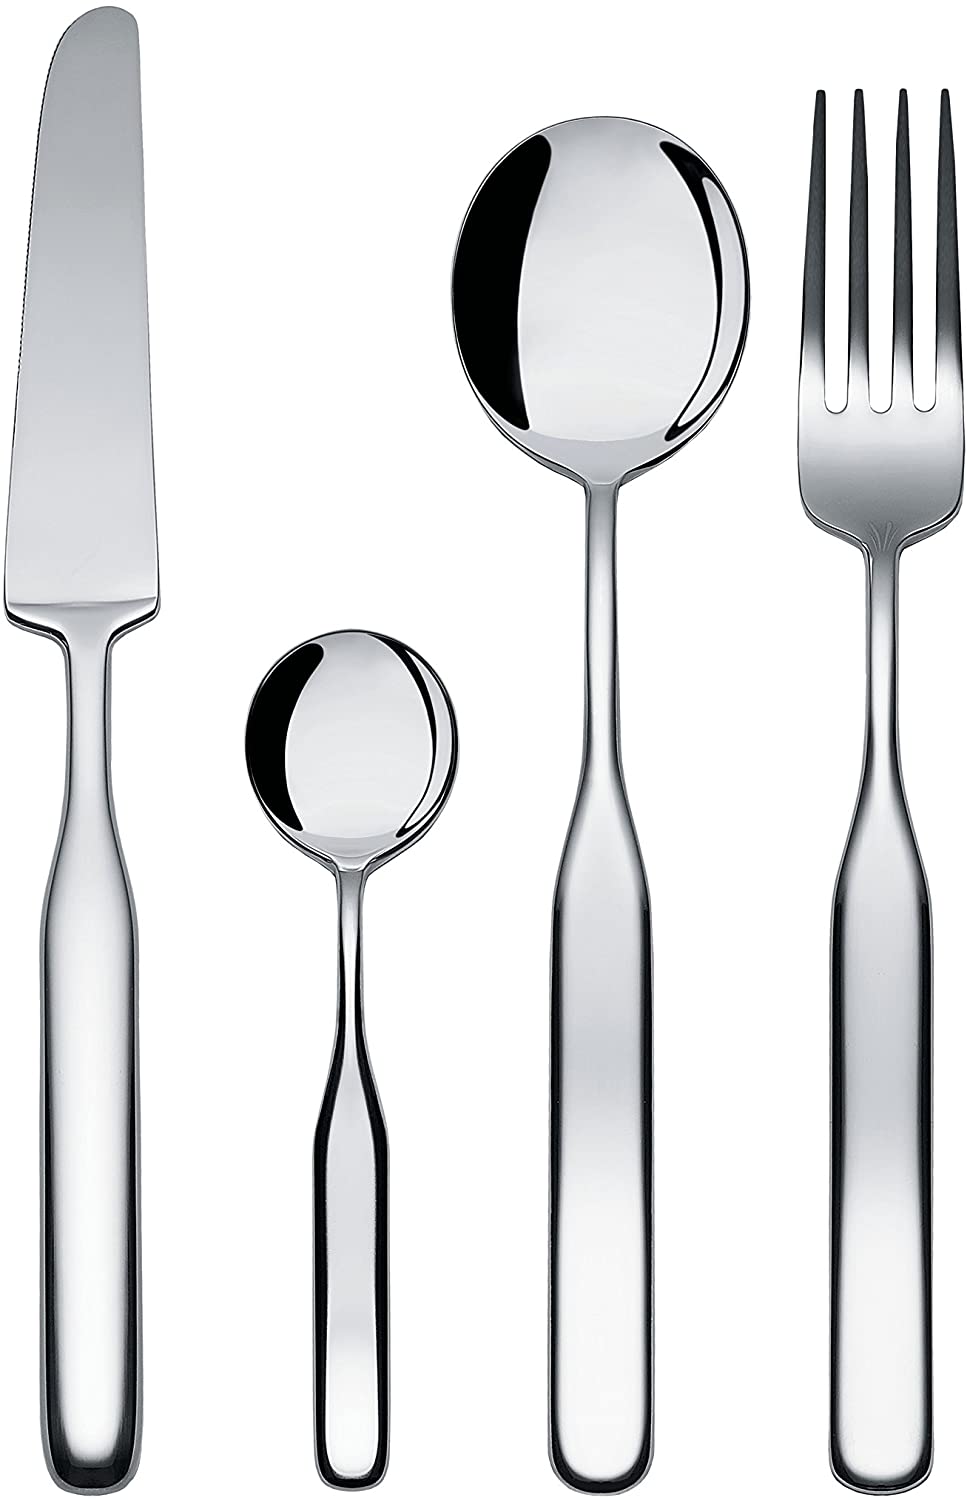 \'Alessi IS02S5 Collo Alto/Cutlery Set including TEASPOON 18/10 POLISHED STAINLESS STEEL 3.5 x 25 x 5.500 cm – silver